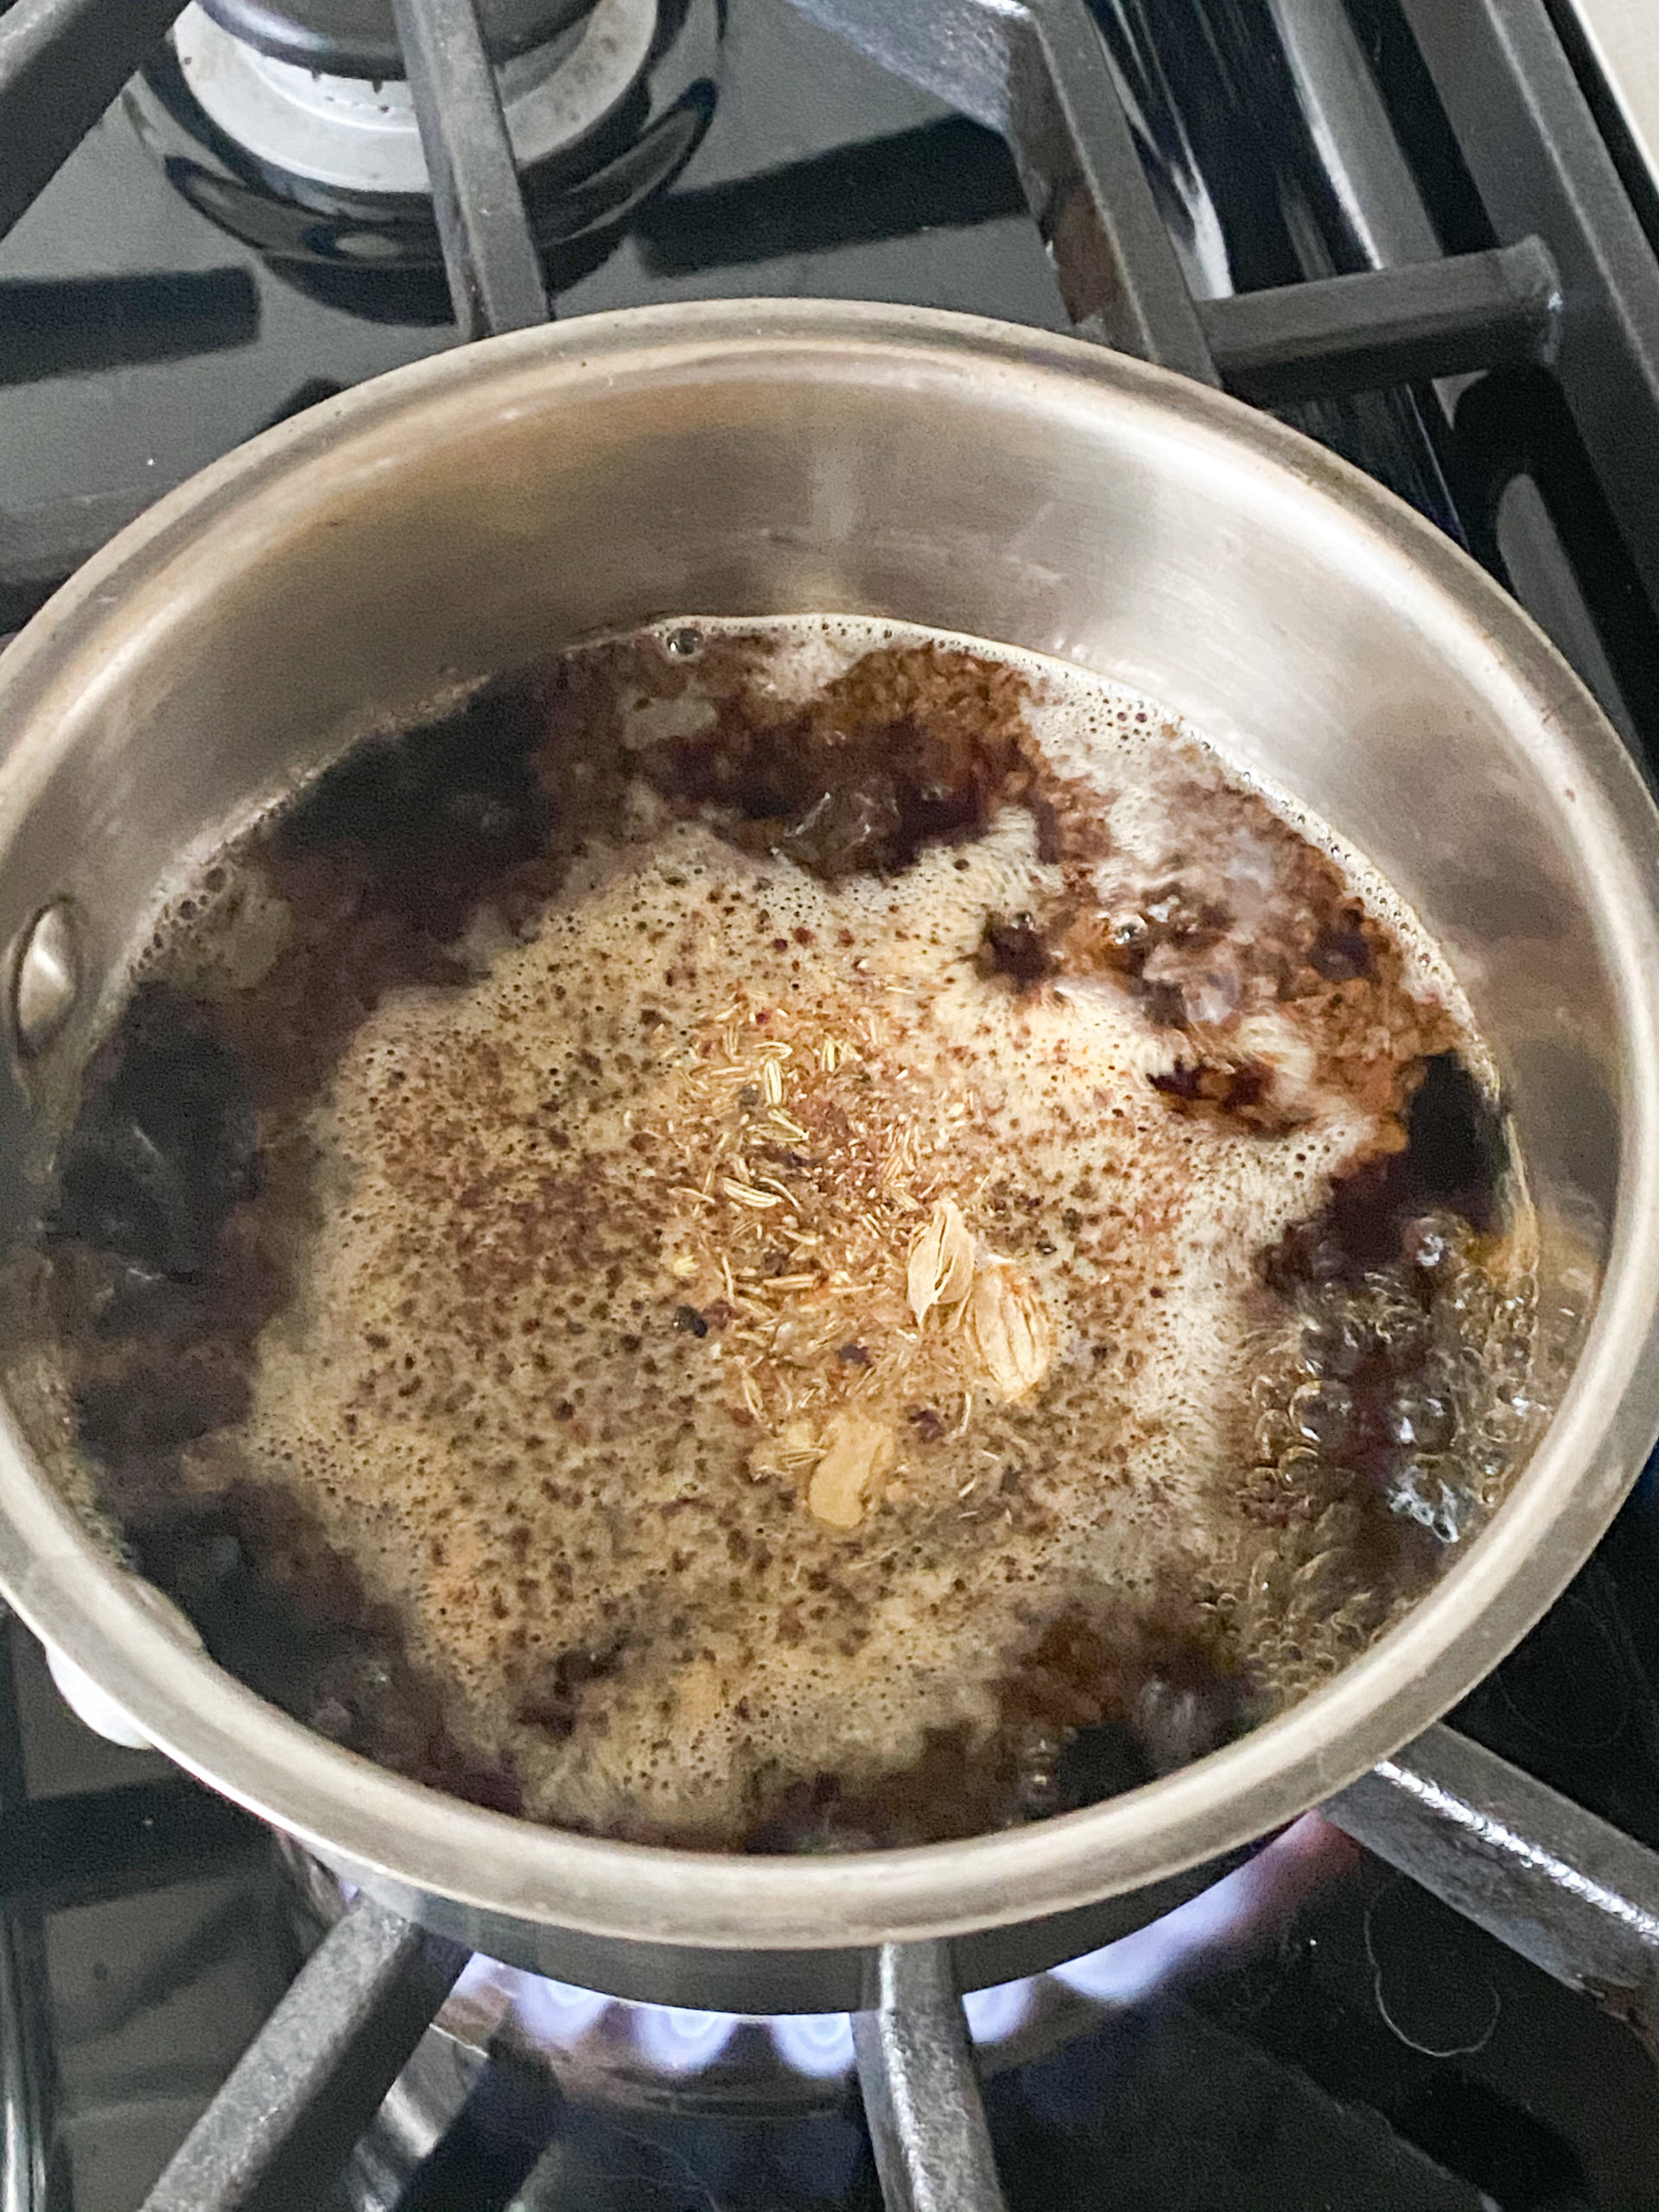 tea leaves and spices boiling together in water in a saucepan